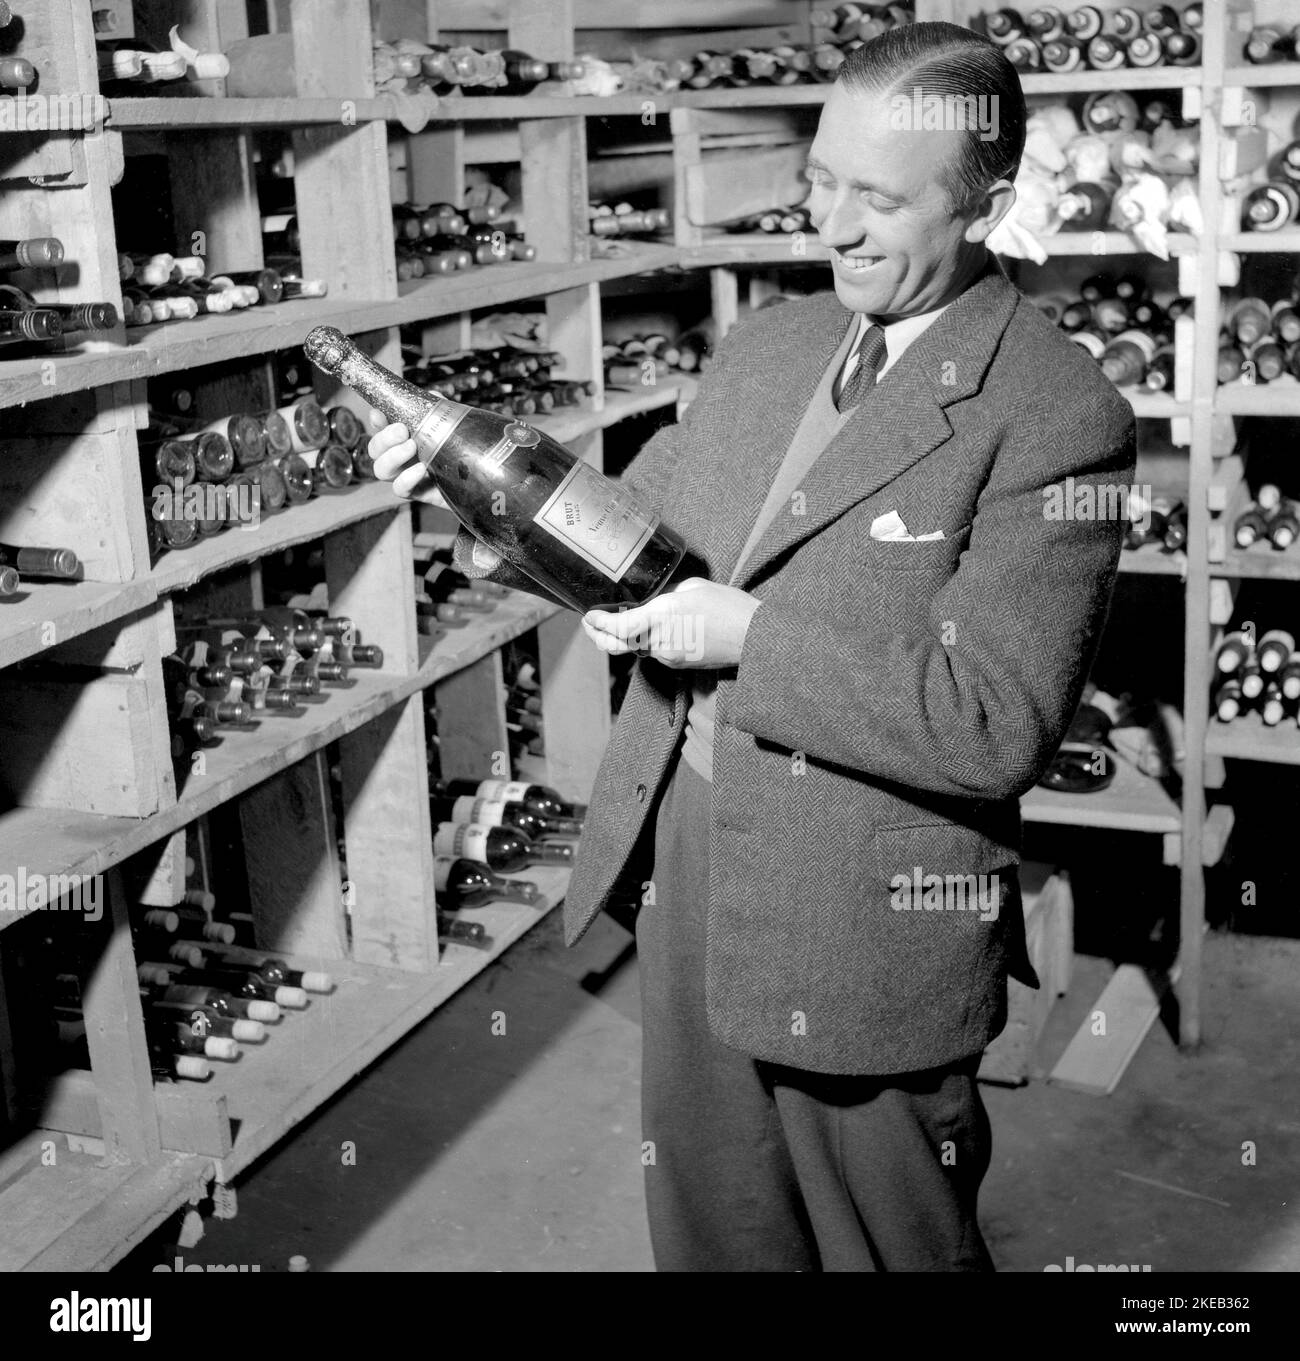 Wine cellar in the 1950s. Hotel Sälen högfjällshotell holds a wine cellar that looks fairly well stocked with bottles in all the shelves. A man holds a bottle of Champagne. A 1945 Veuve Clocquot Ponsardin Vintage Brut. january 10 1954 Sweden. Conard ref 2604 Stock Photo